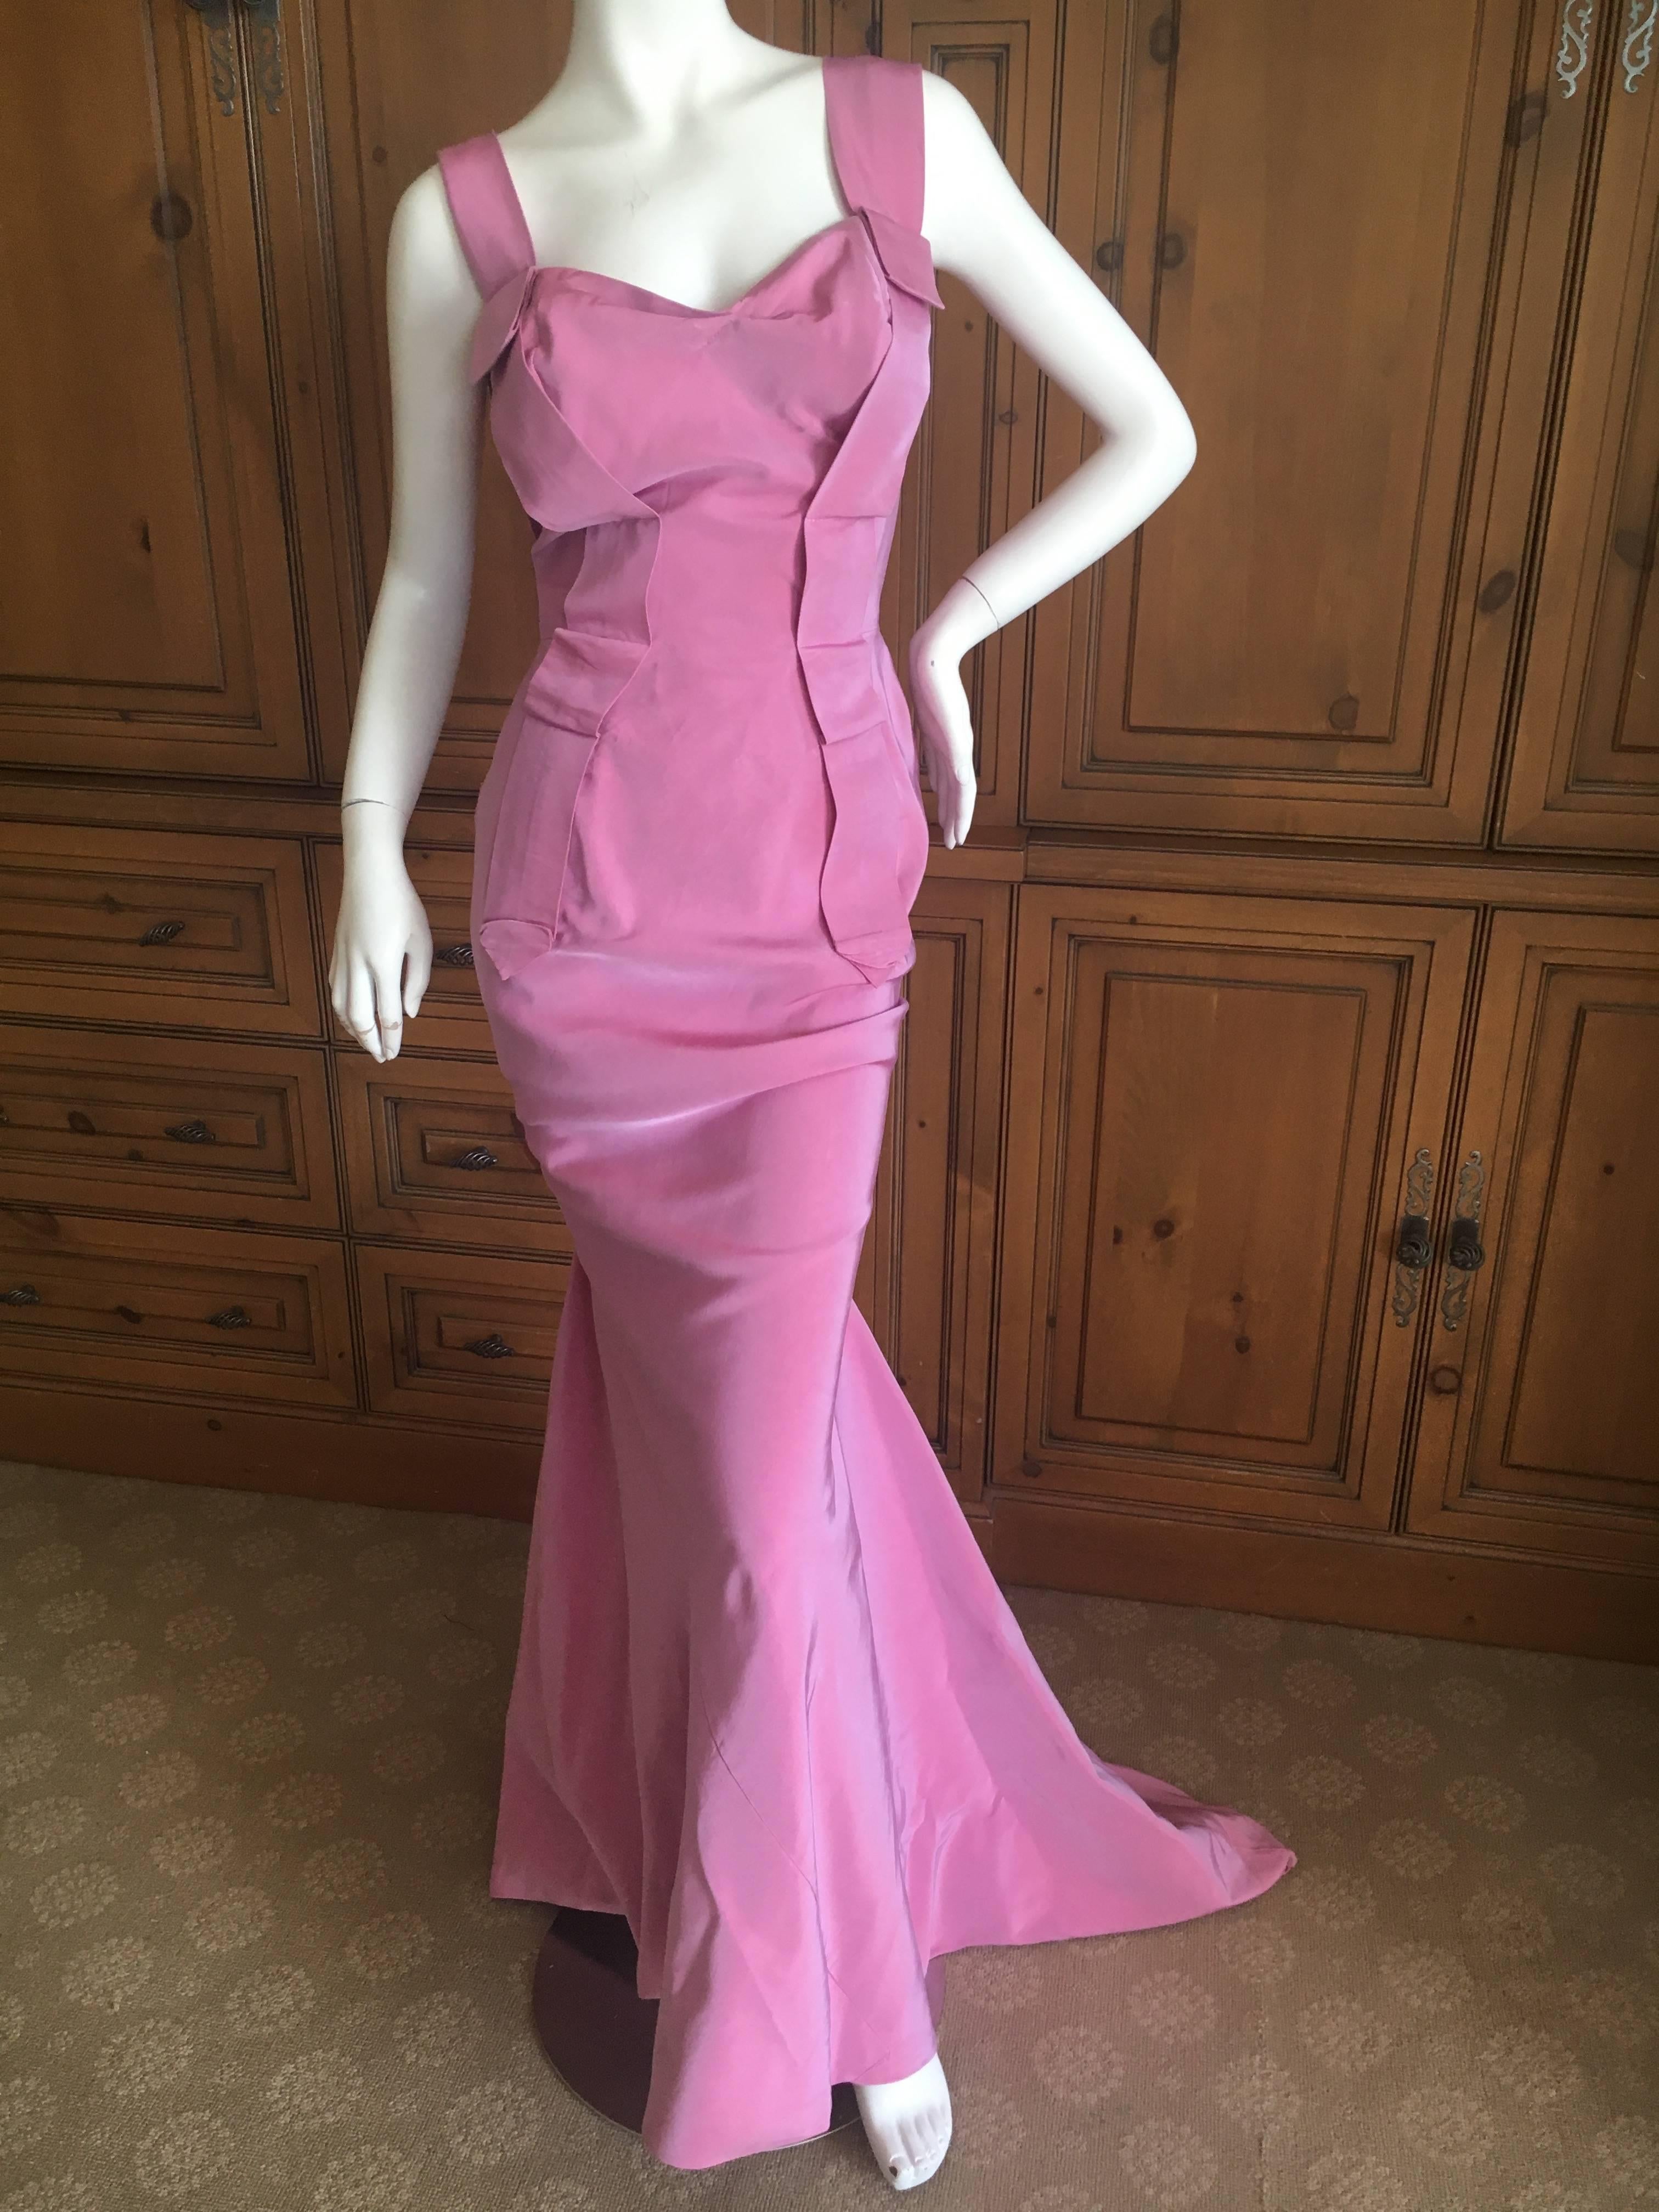 Vivienne Westwood Gold Label Rose Pink Evening Dress with Fishtail Train, 2011  For Sale 2